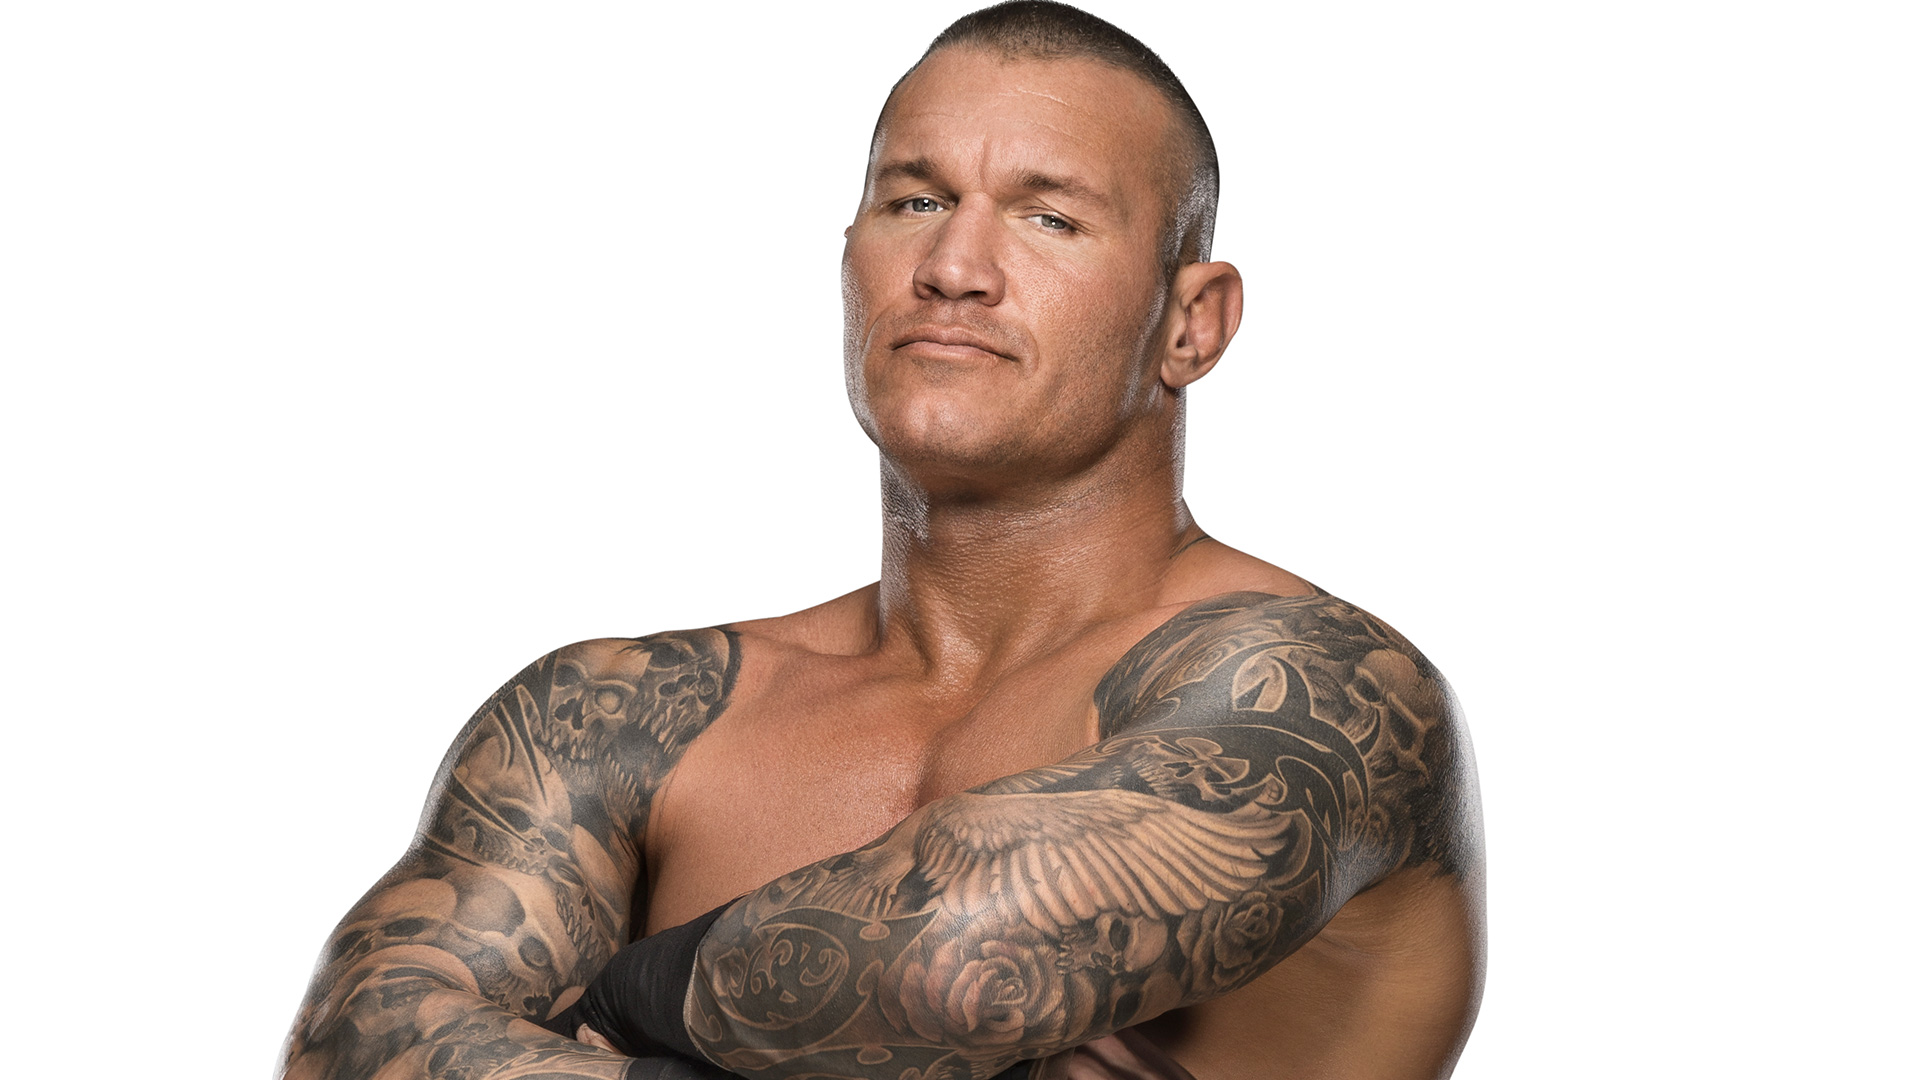 Randy Orton’s tattoo lawsuit set for trial